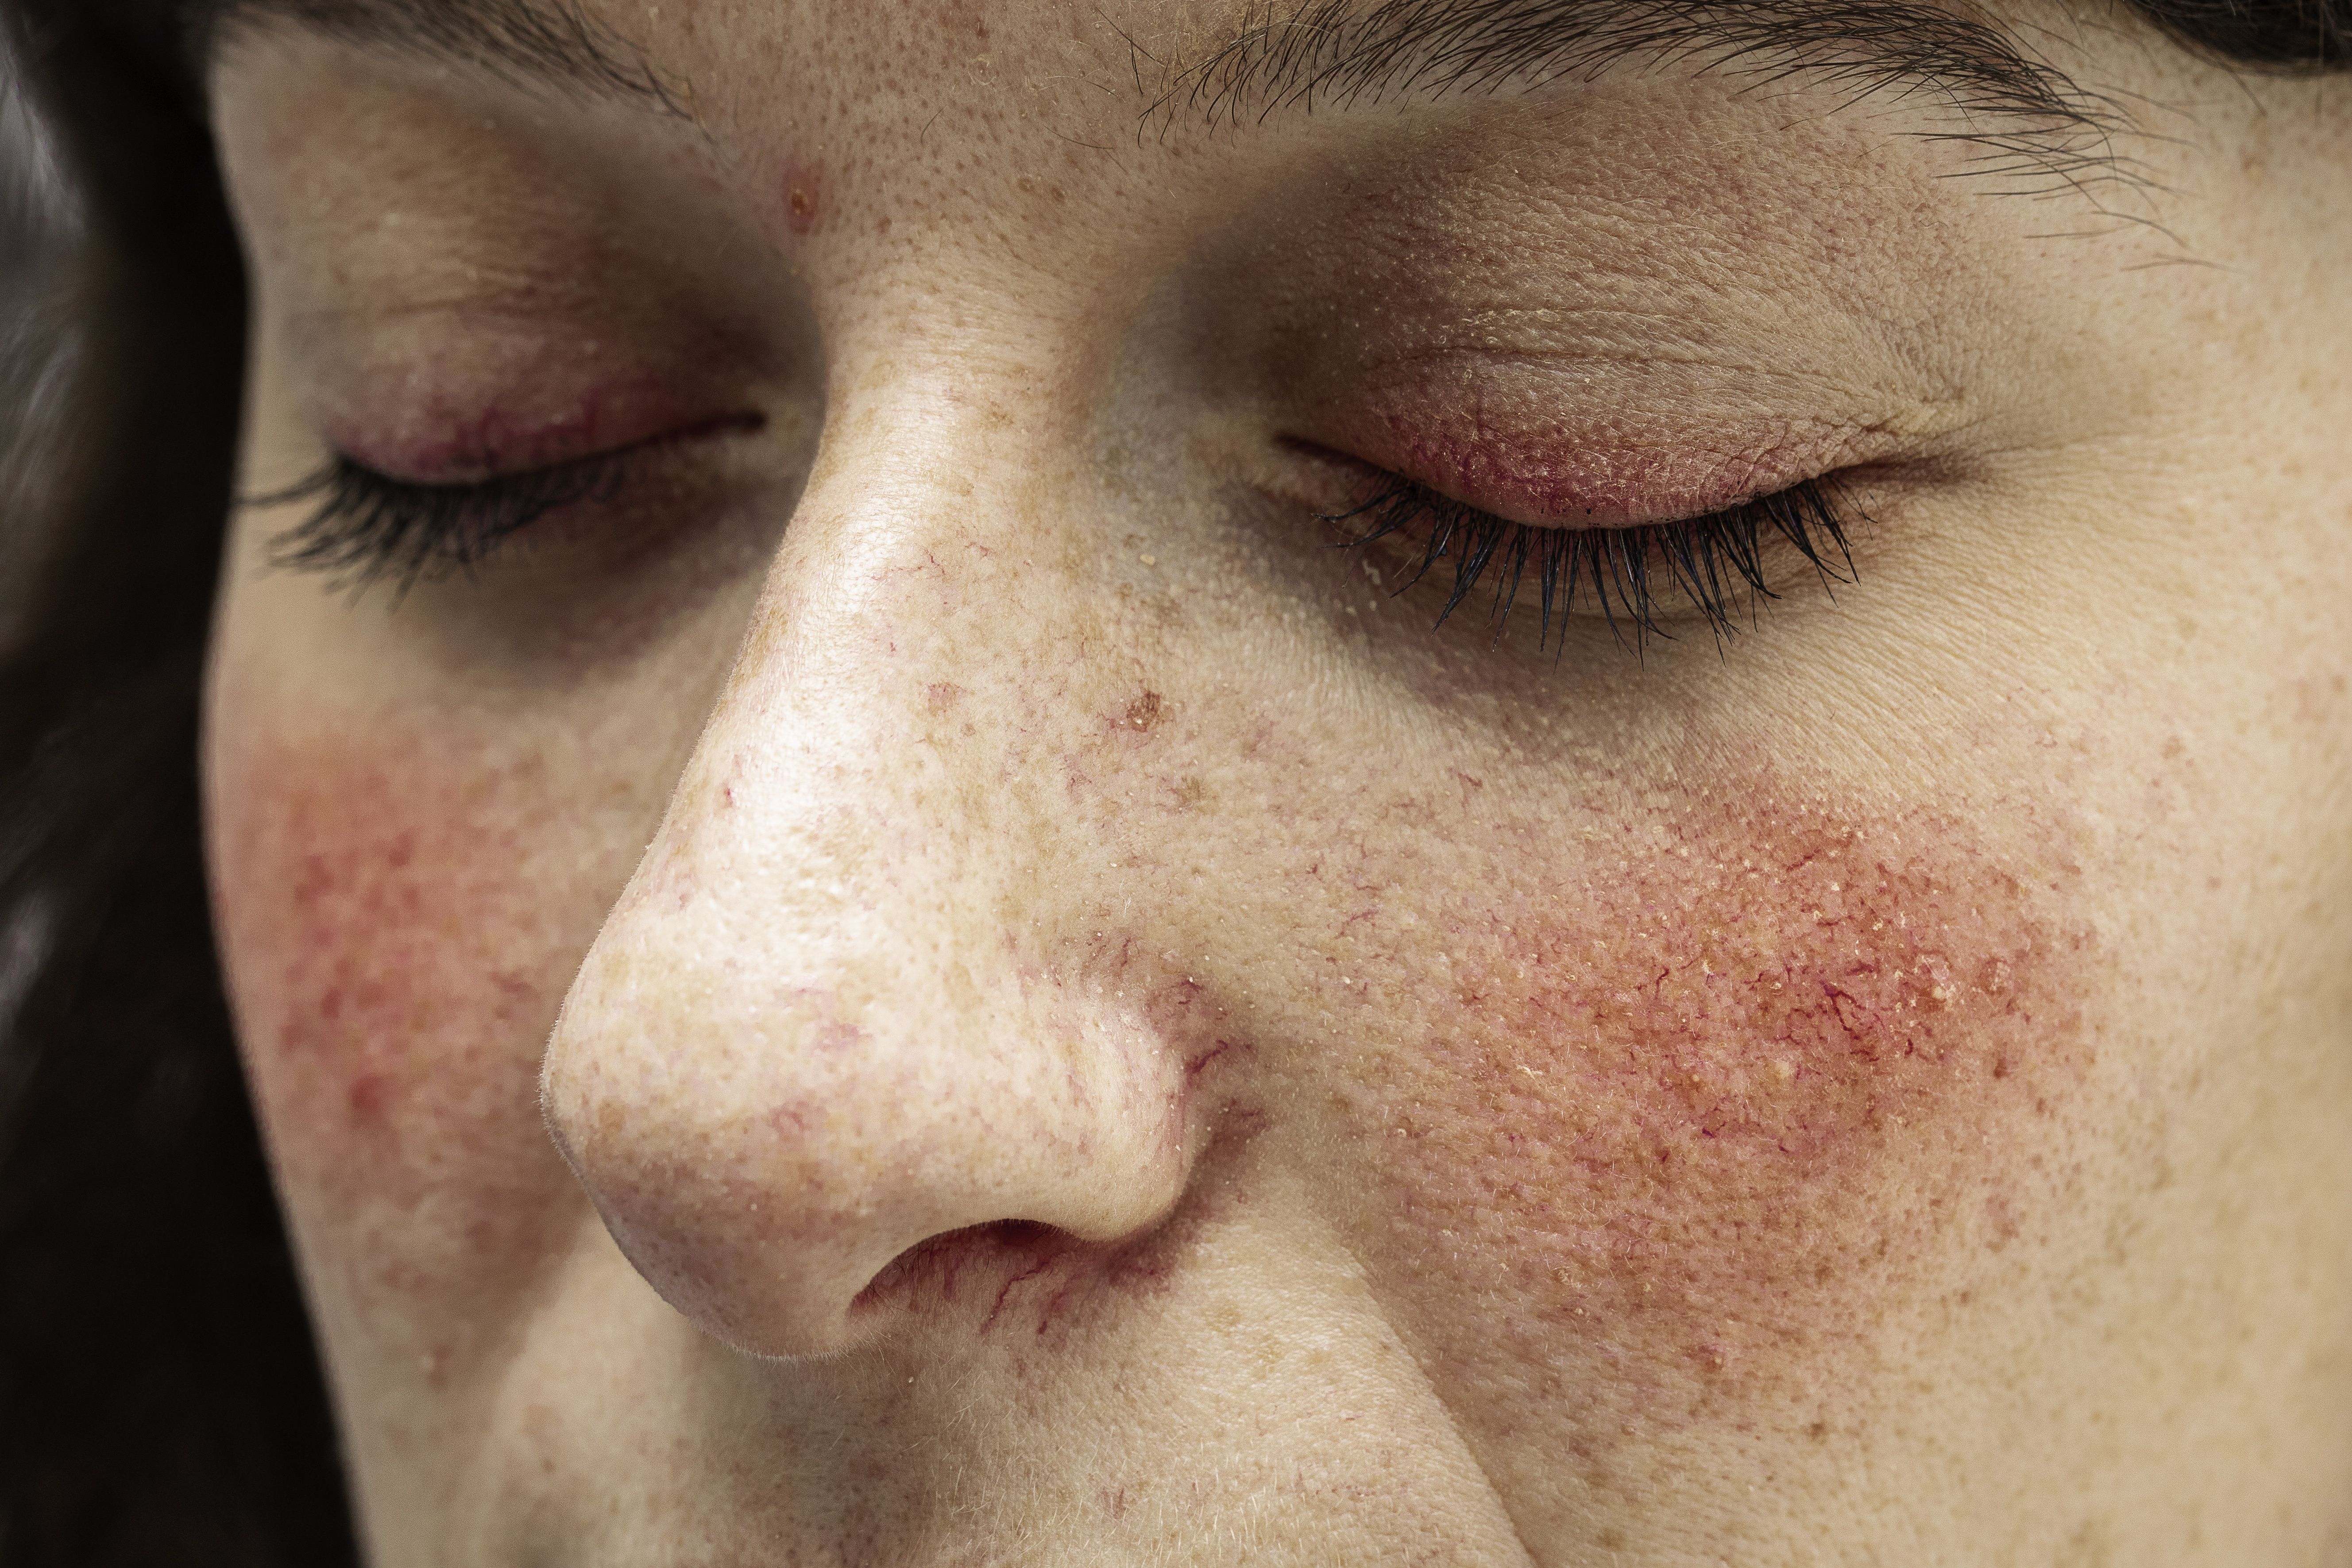 Expert Pearls for Treating Rosacea Patients